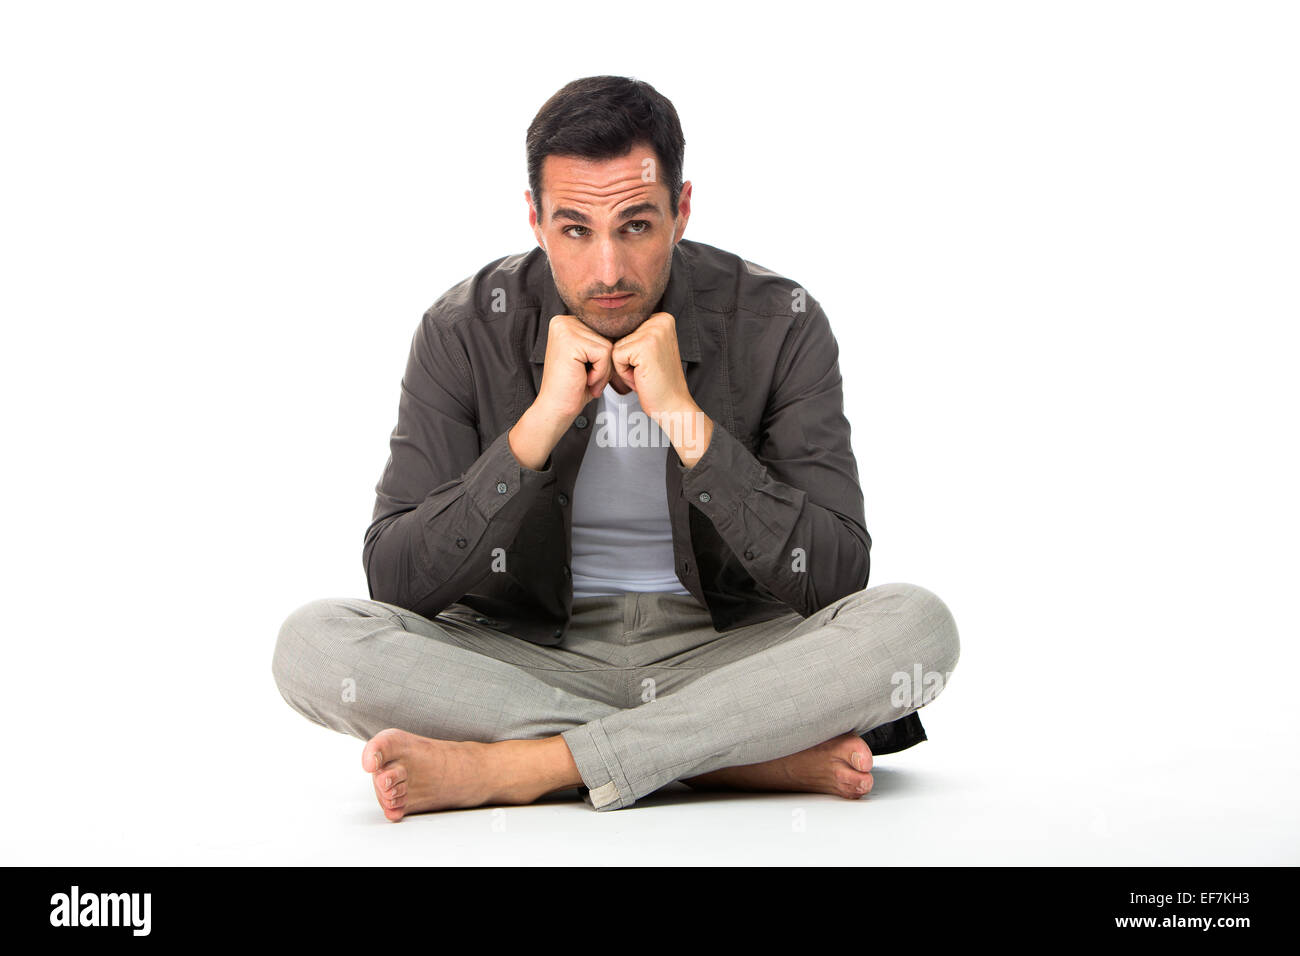 Thoughtful man sitting on the floor with the hands under his chin Stock Photo